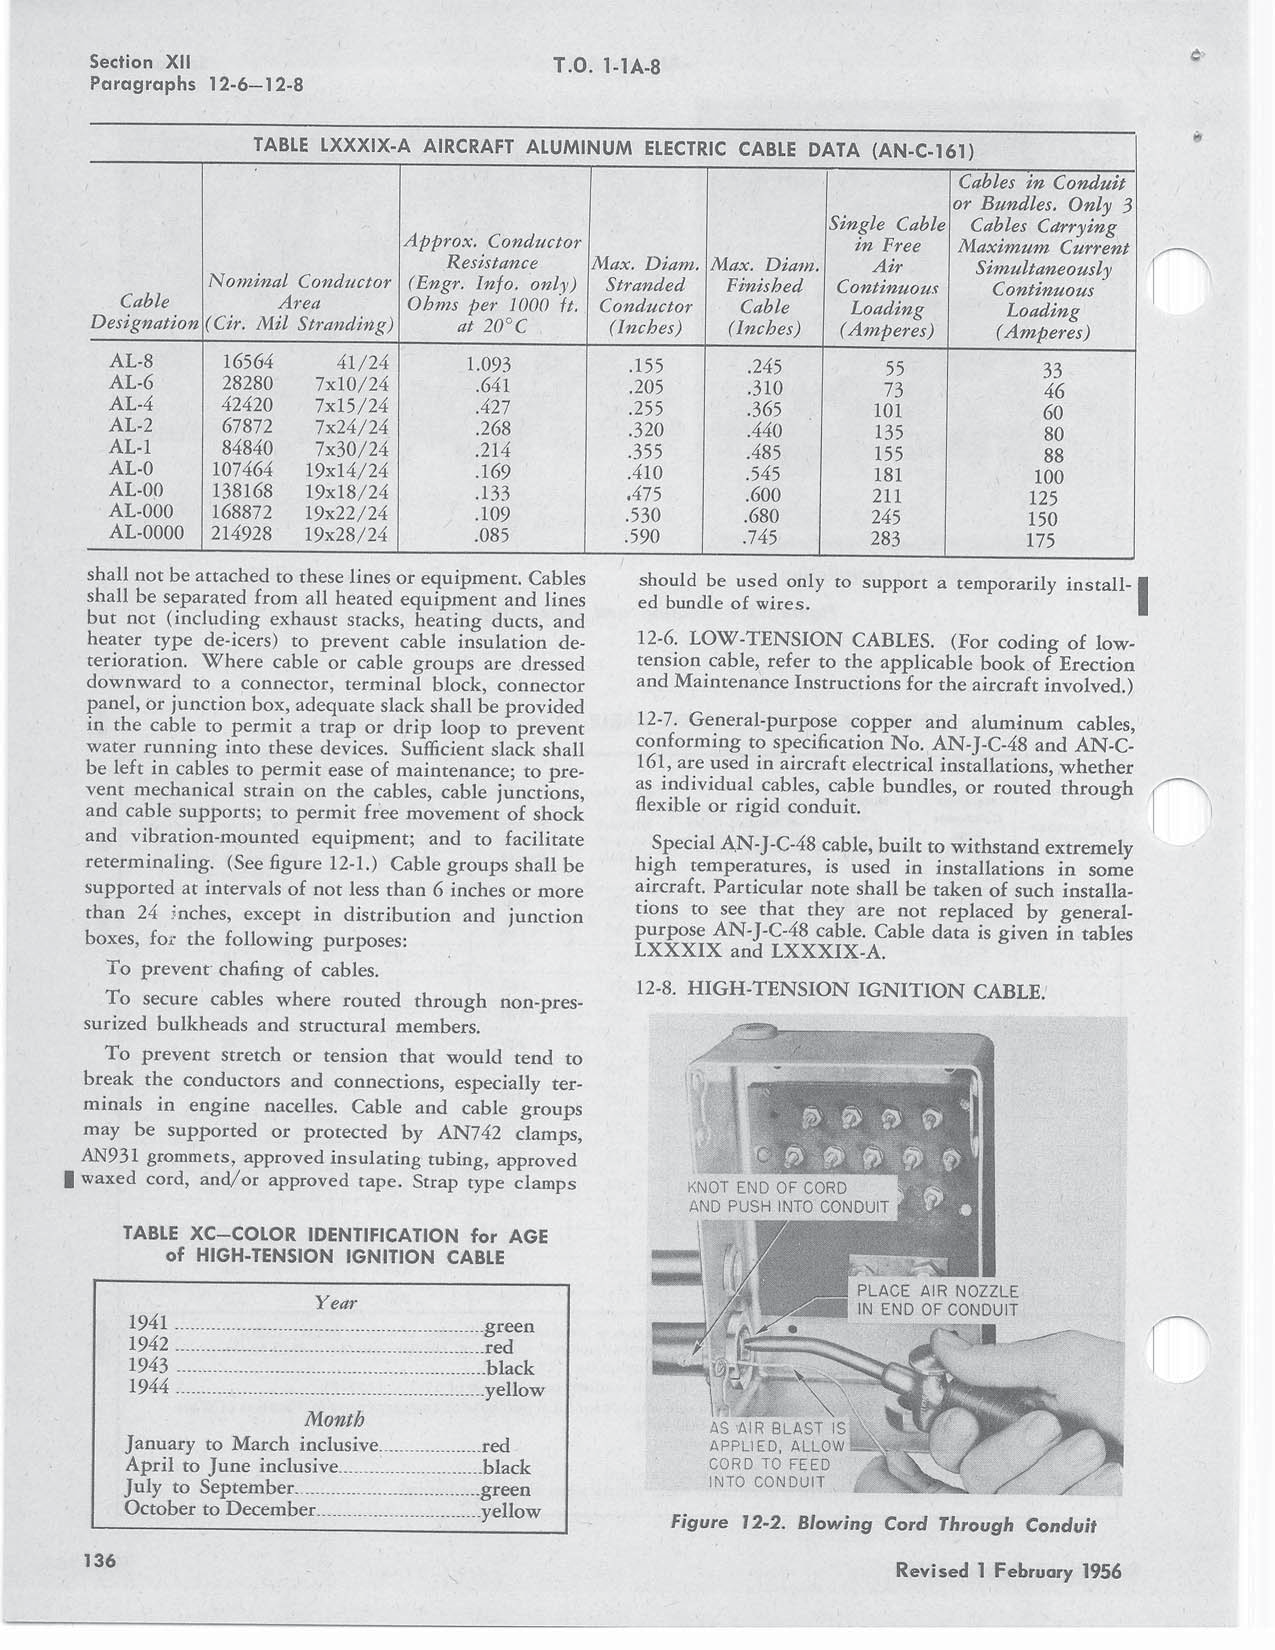 Sample page 148 from AirCorps Library document: General Aircraft Structural Hardware